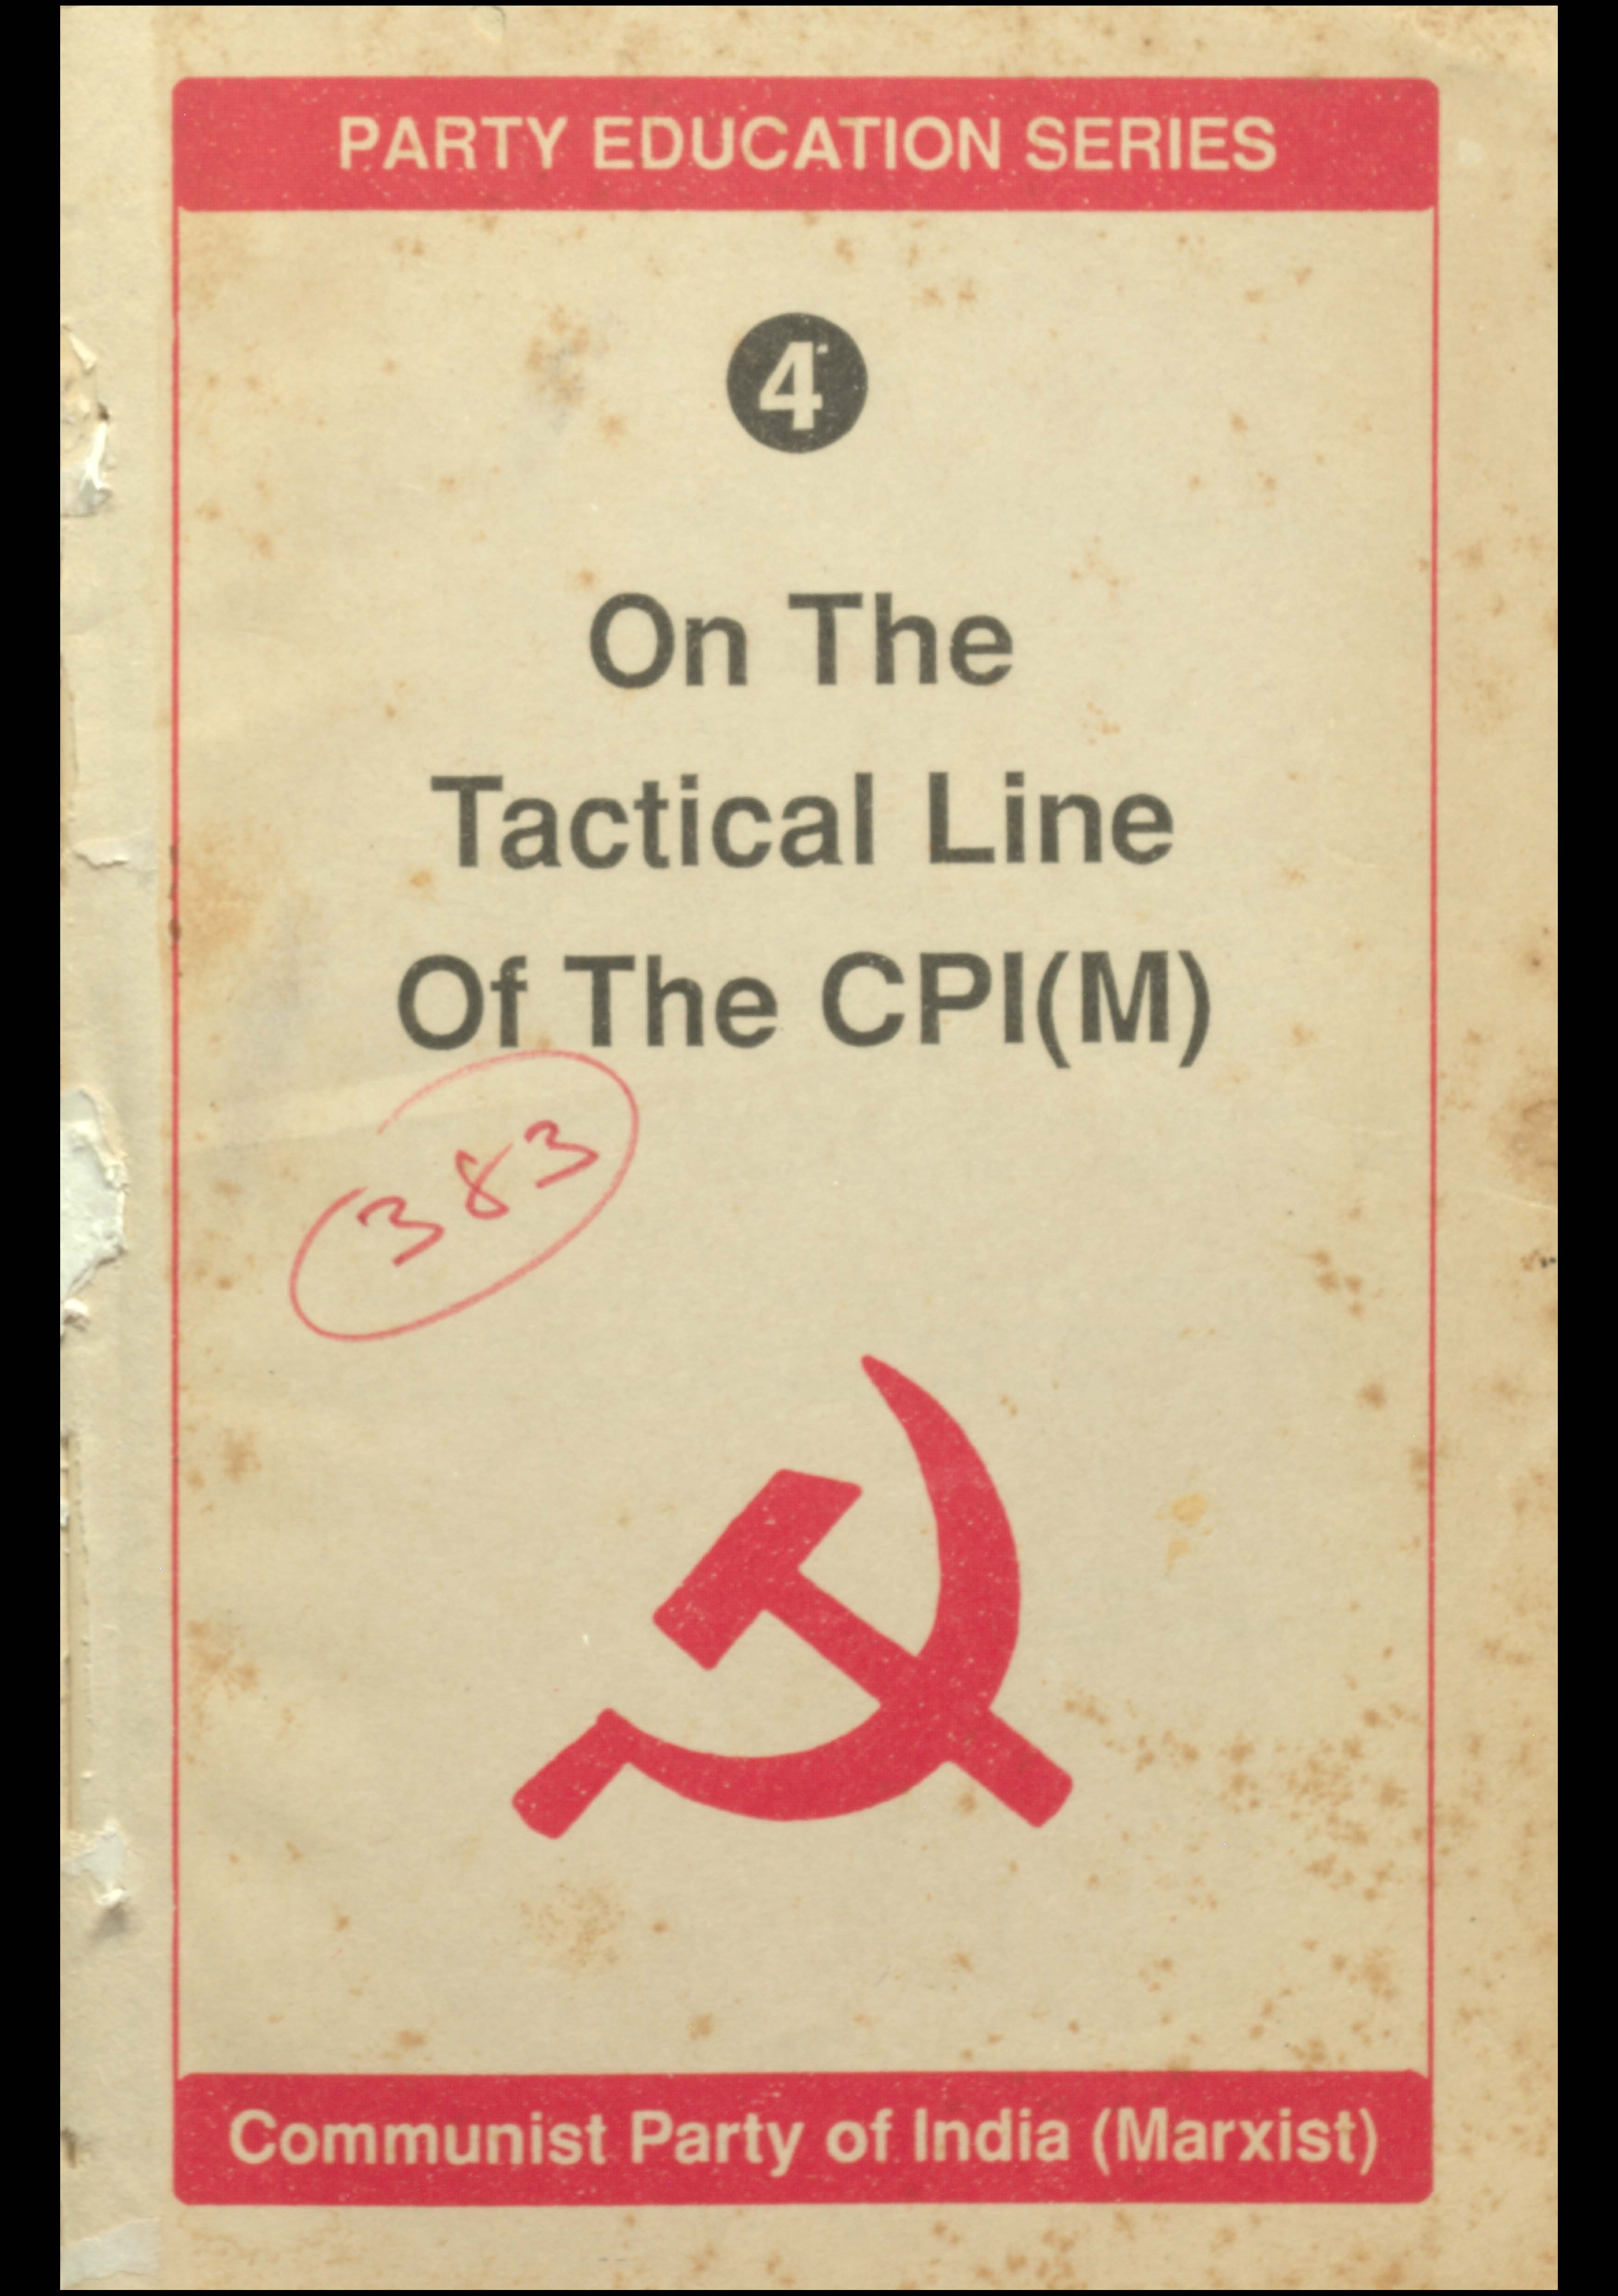 On The Tactical Line Of The CPI (M)